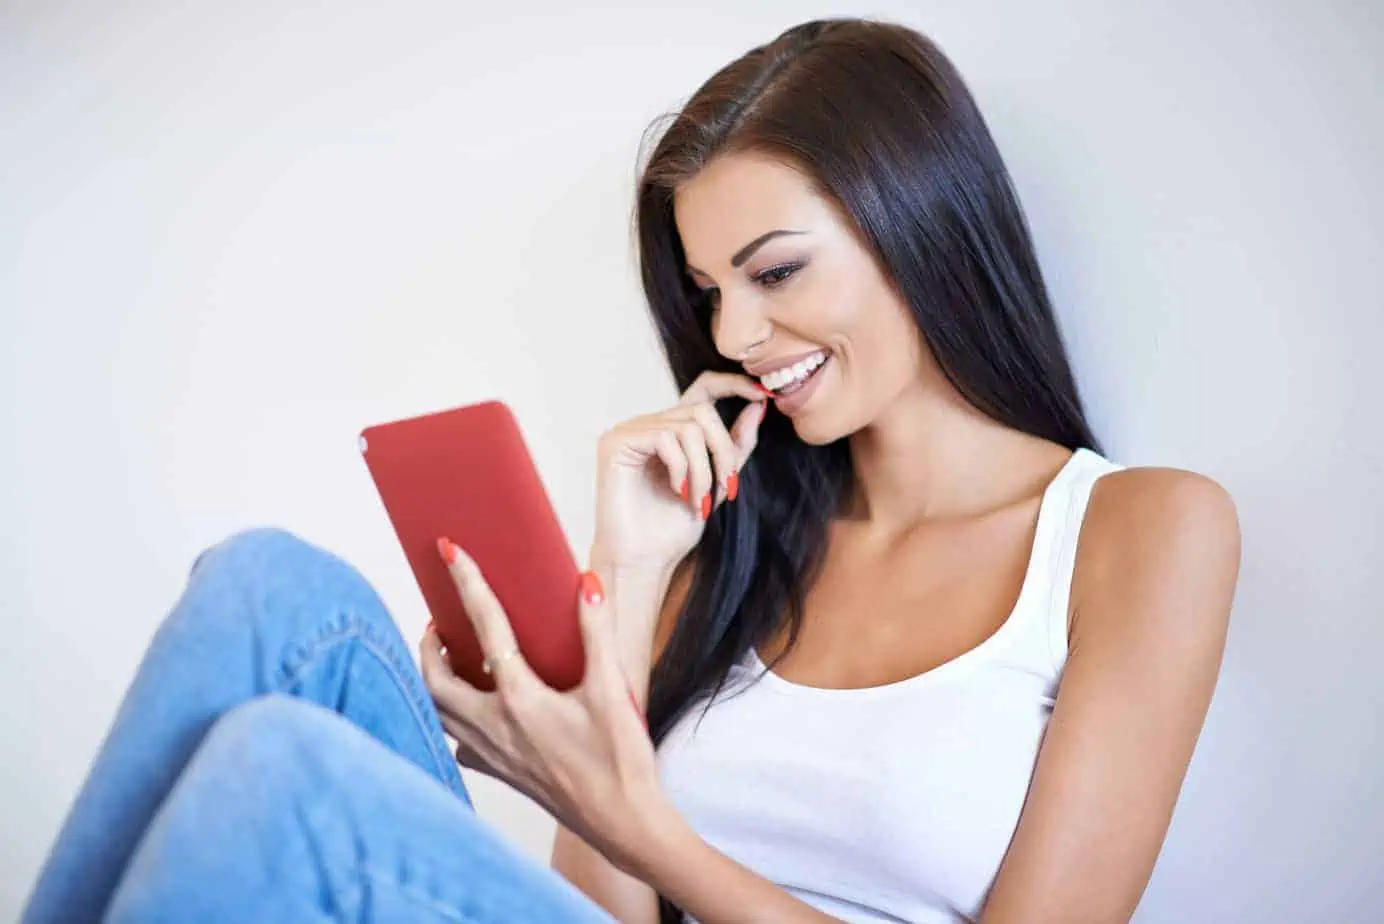 A woman is smiling while holding a tablet